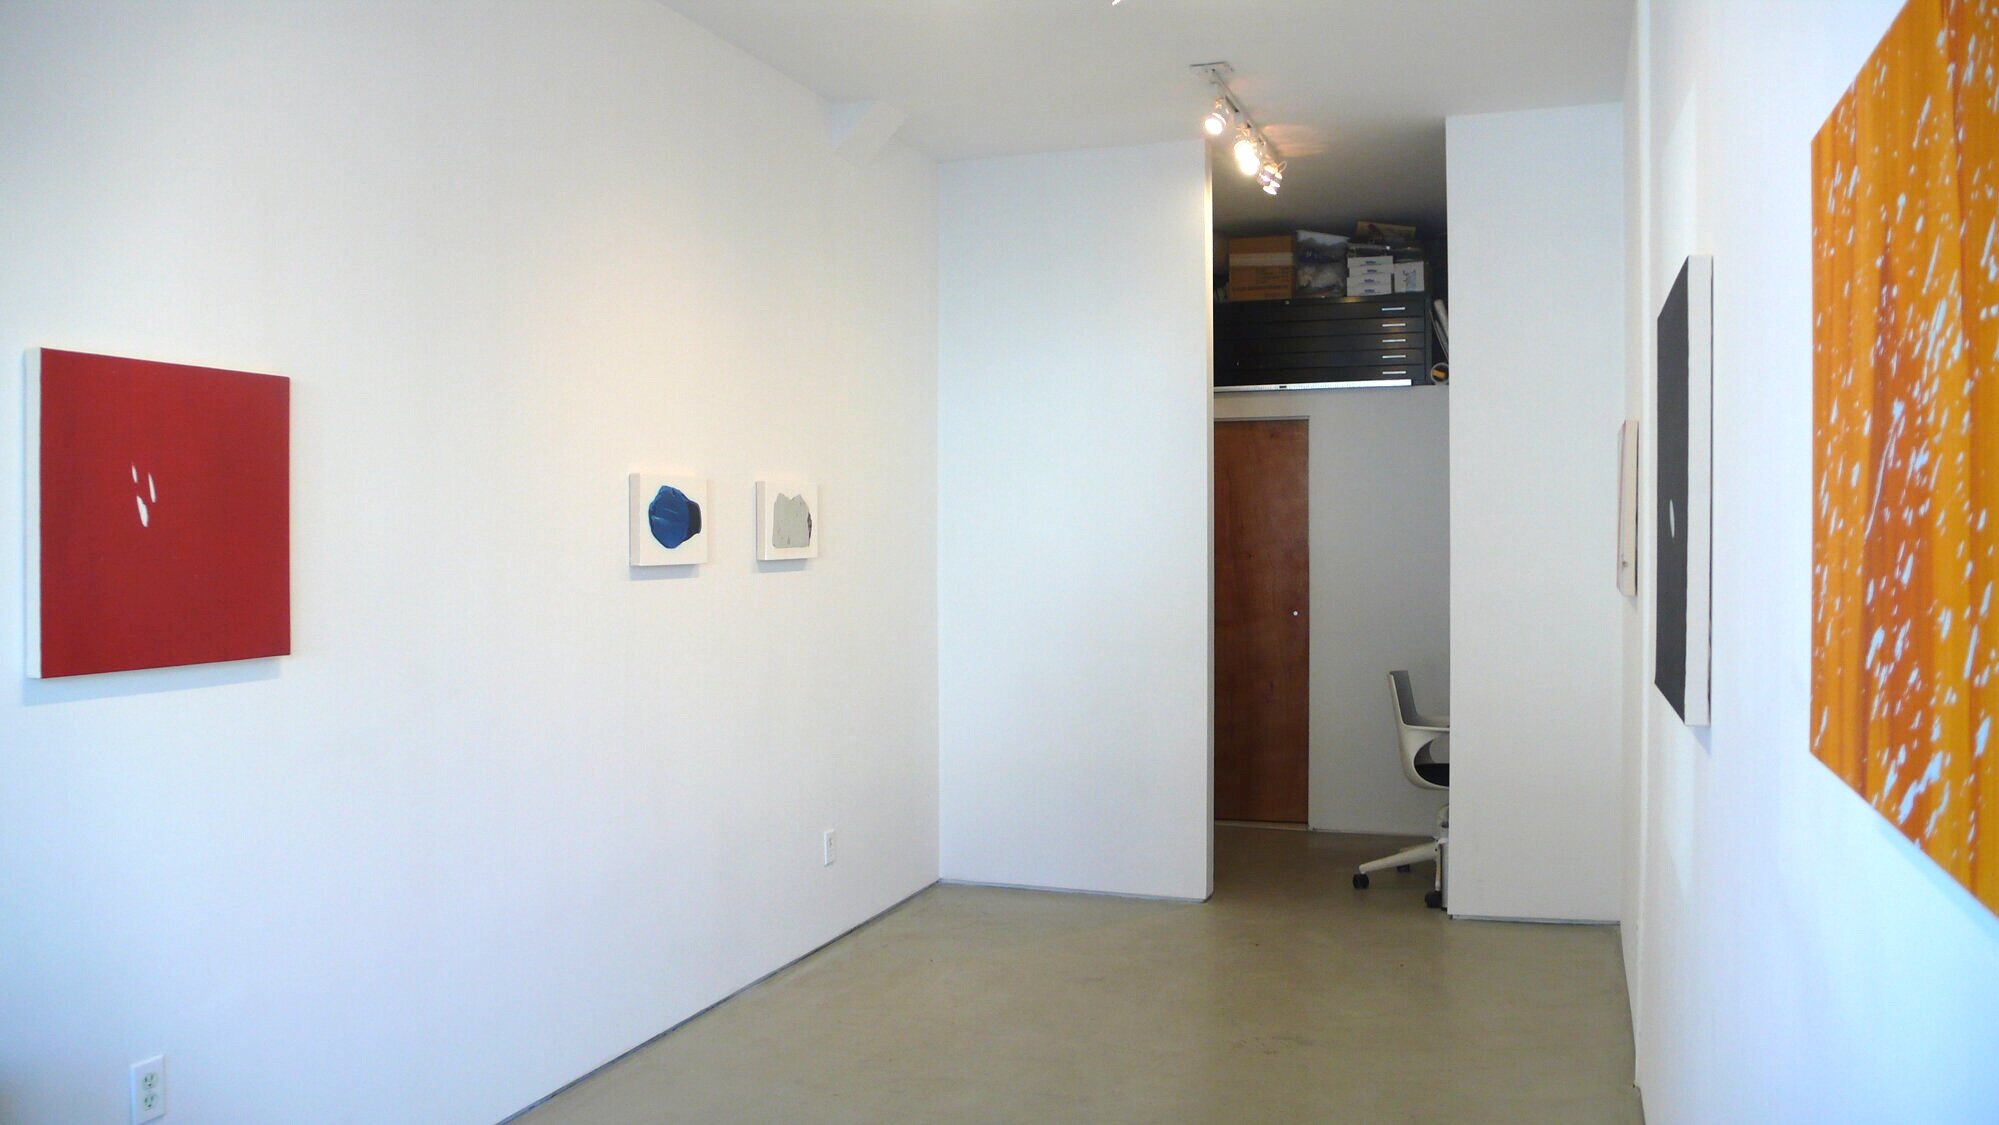 Installation image from the 2009 Miyeon Lee exhibition, CONCRETE UNIVERSE, at Cindy Rucker Gallery, Number 35